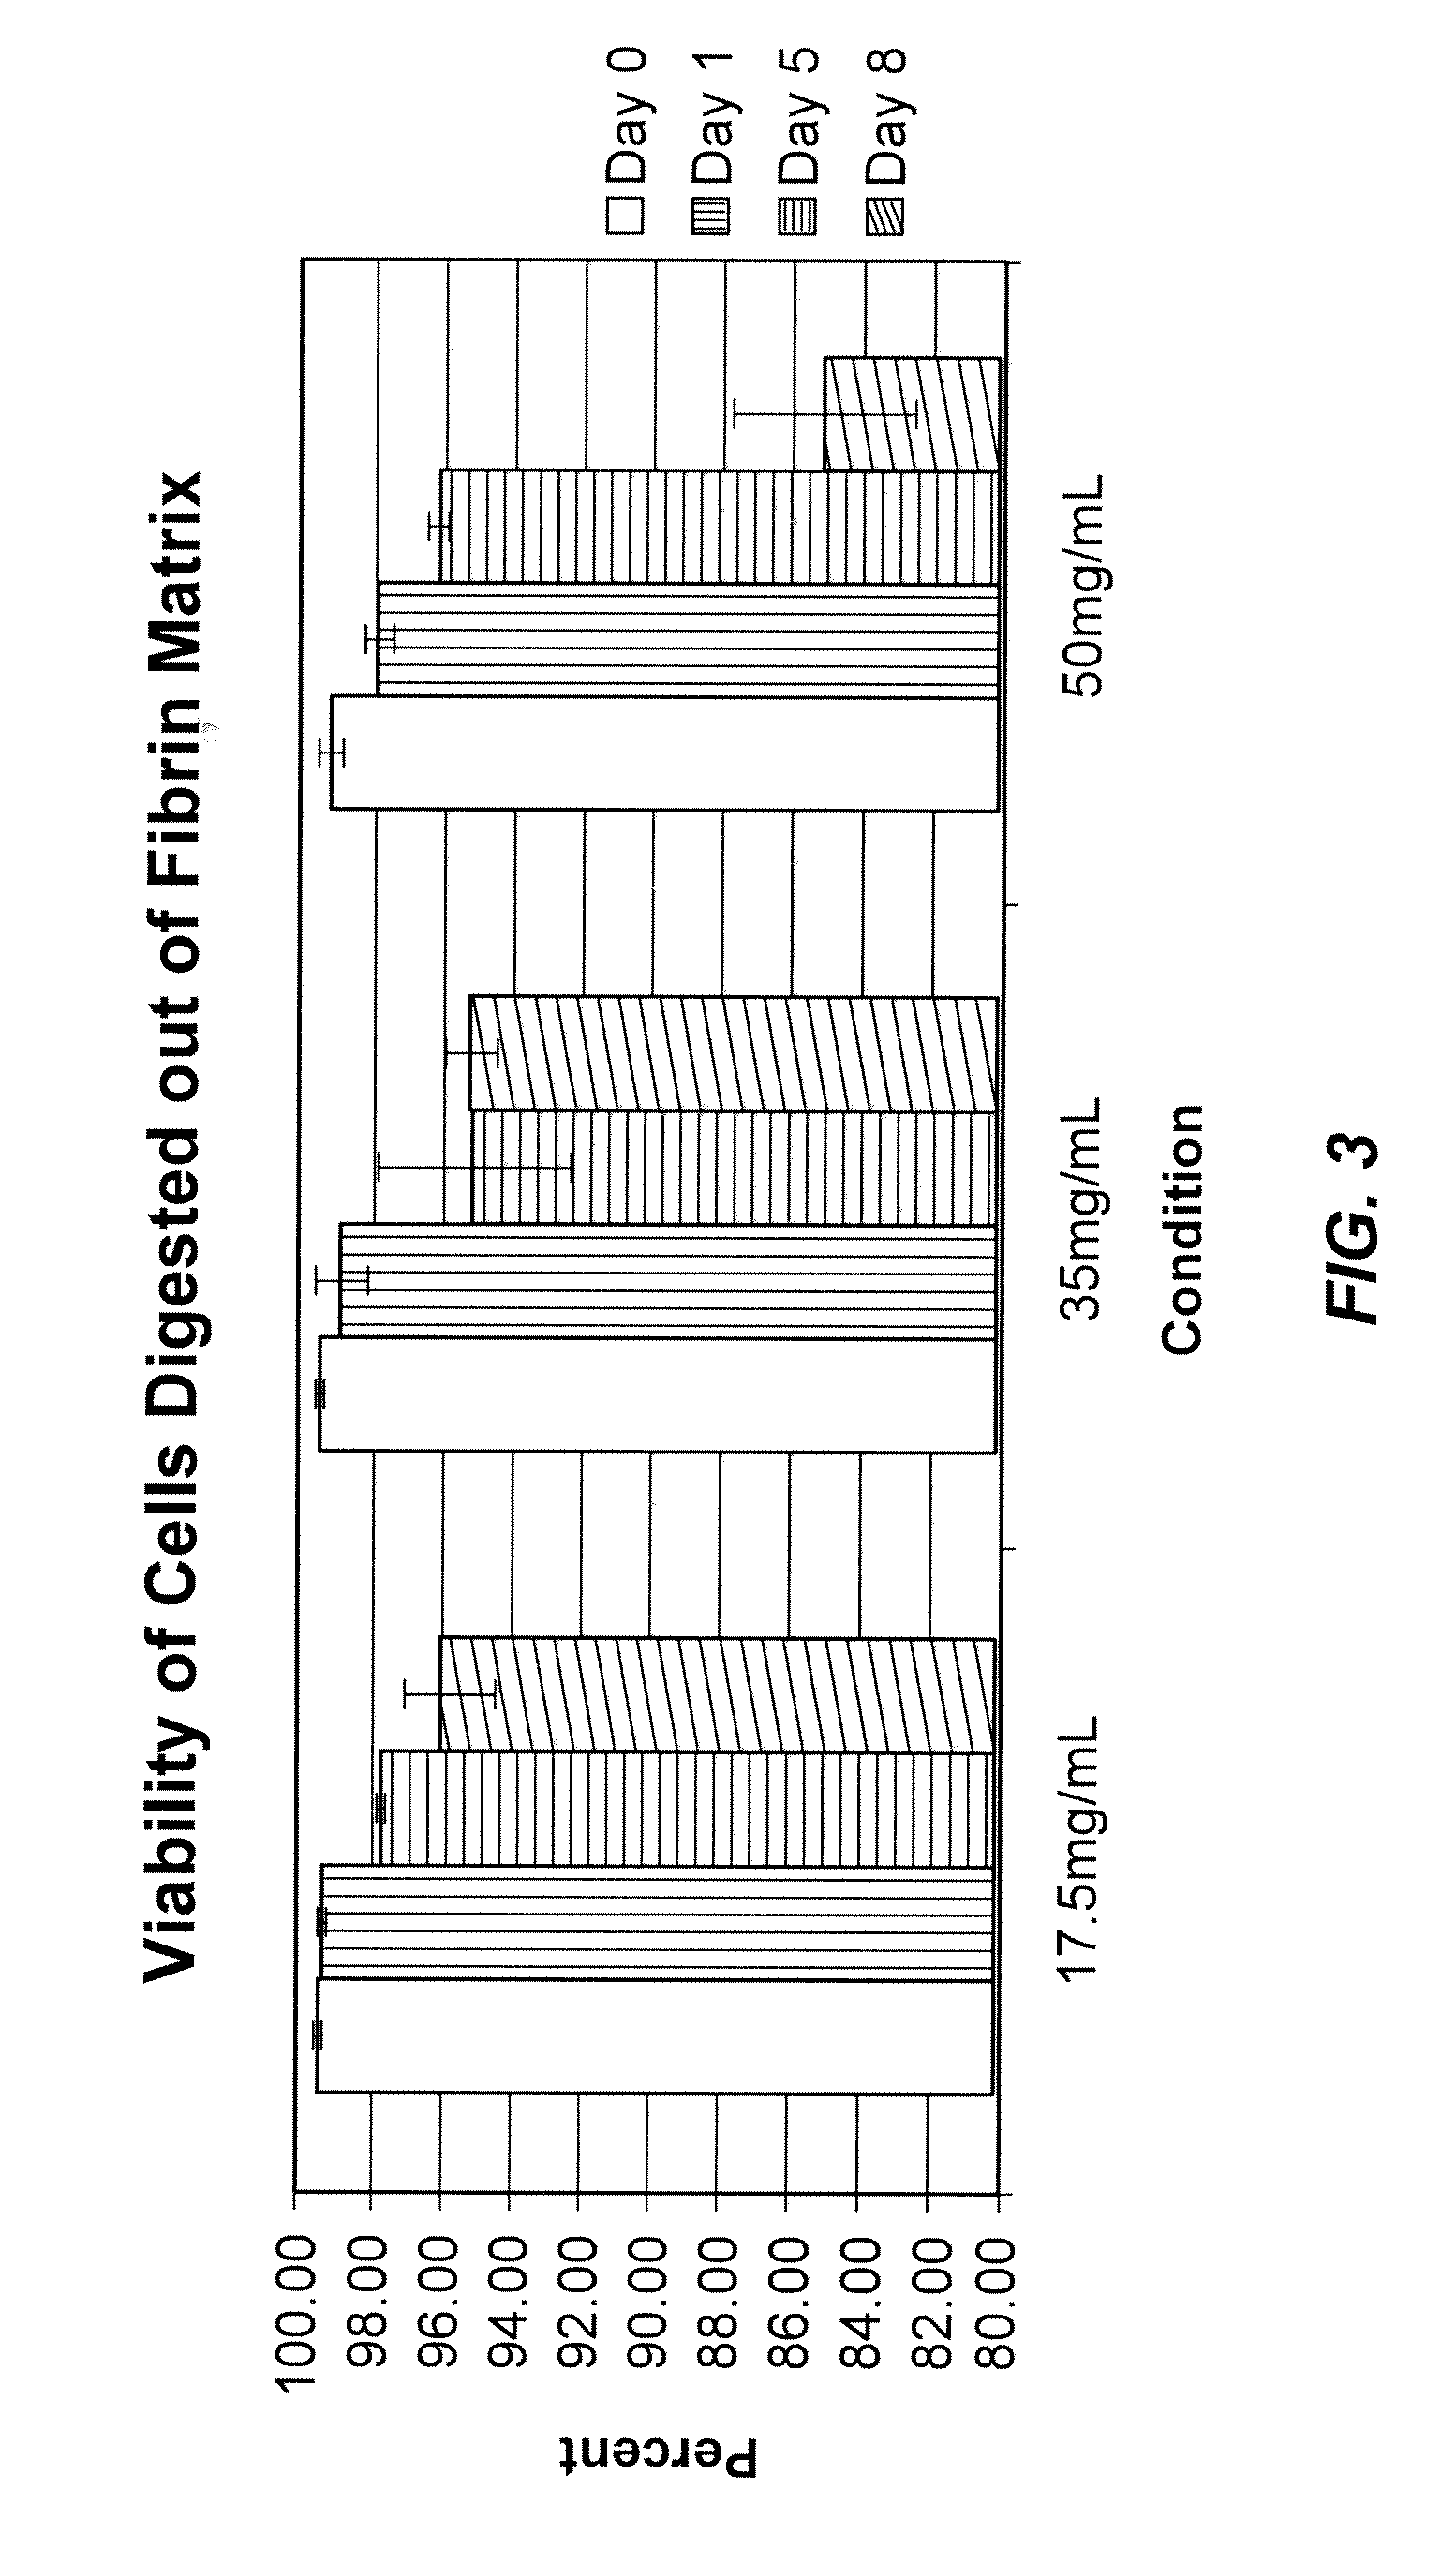 Using of scaffold comprising fibrin for delivery of stem cells